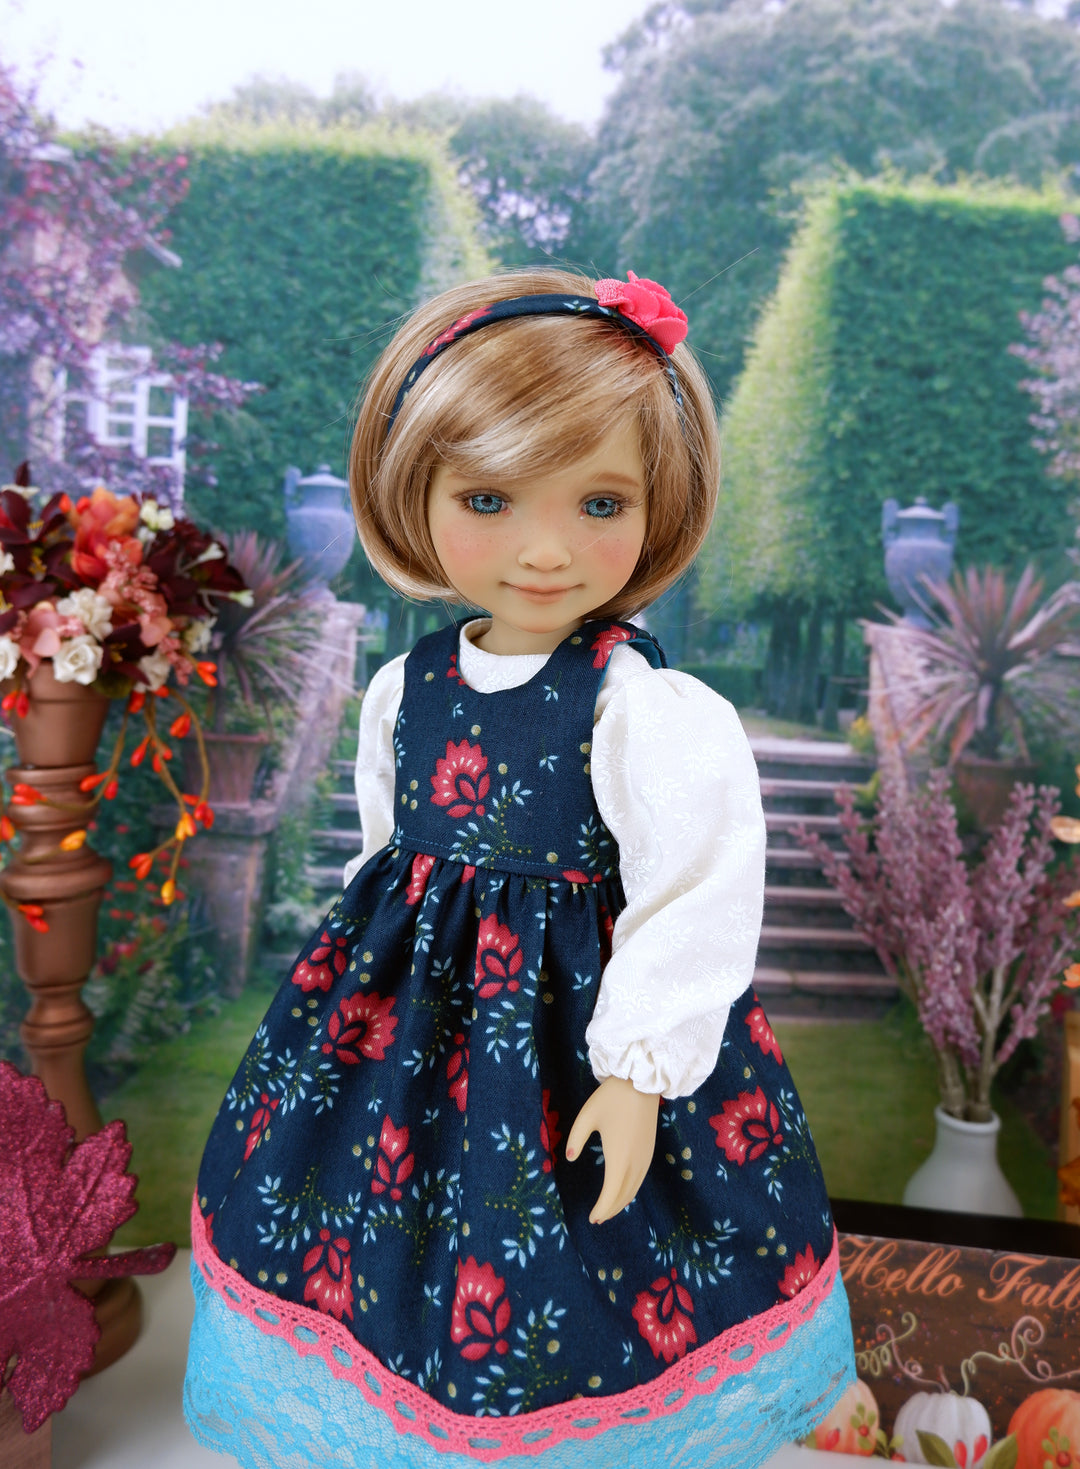 Fall Corsage - dress & pinafore with shoes for Ruby Red Fashion Friends doll